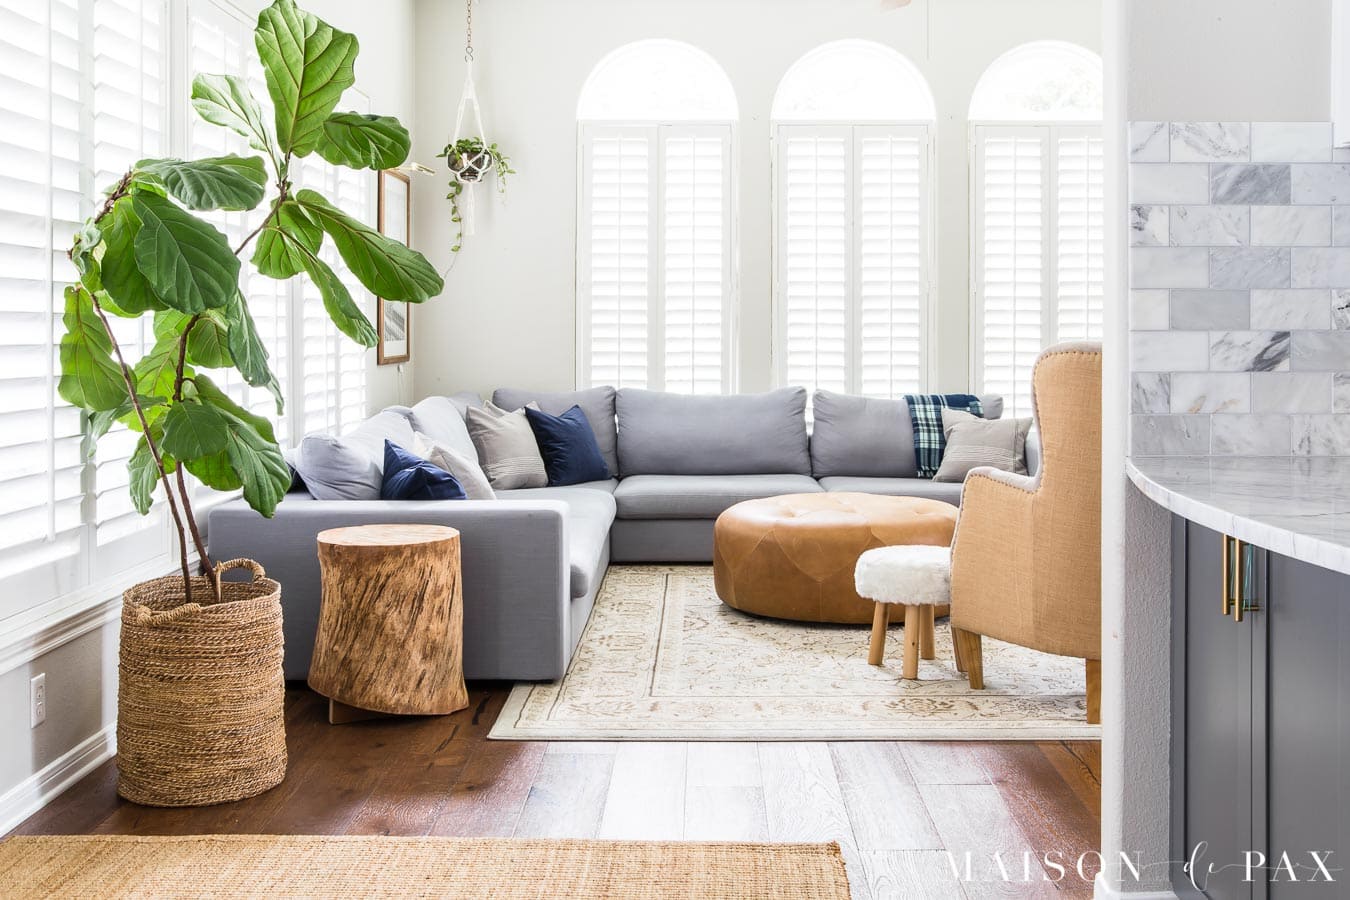 Gray, white, and navy living room with warm netural textures in updated 90s house | Maison de Pax